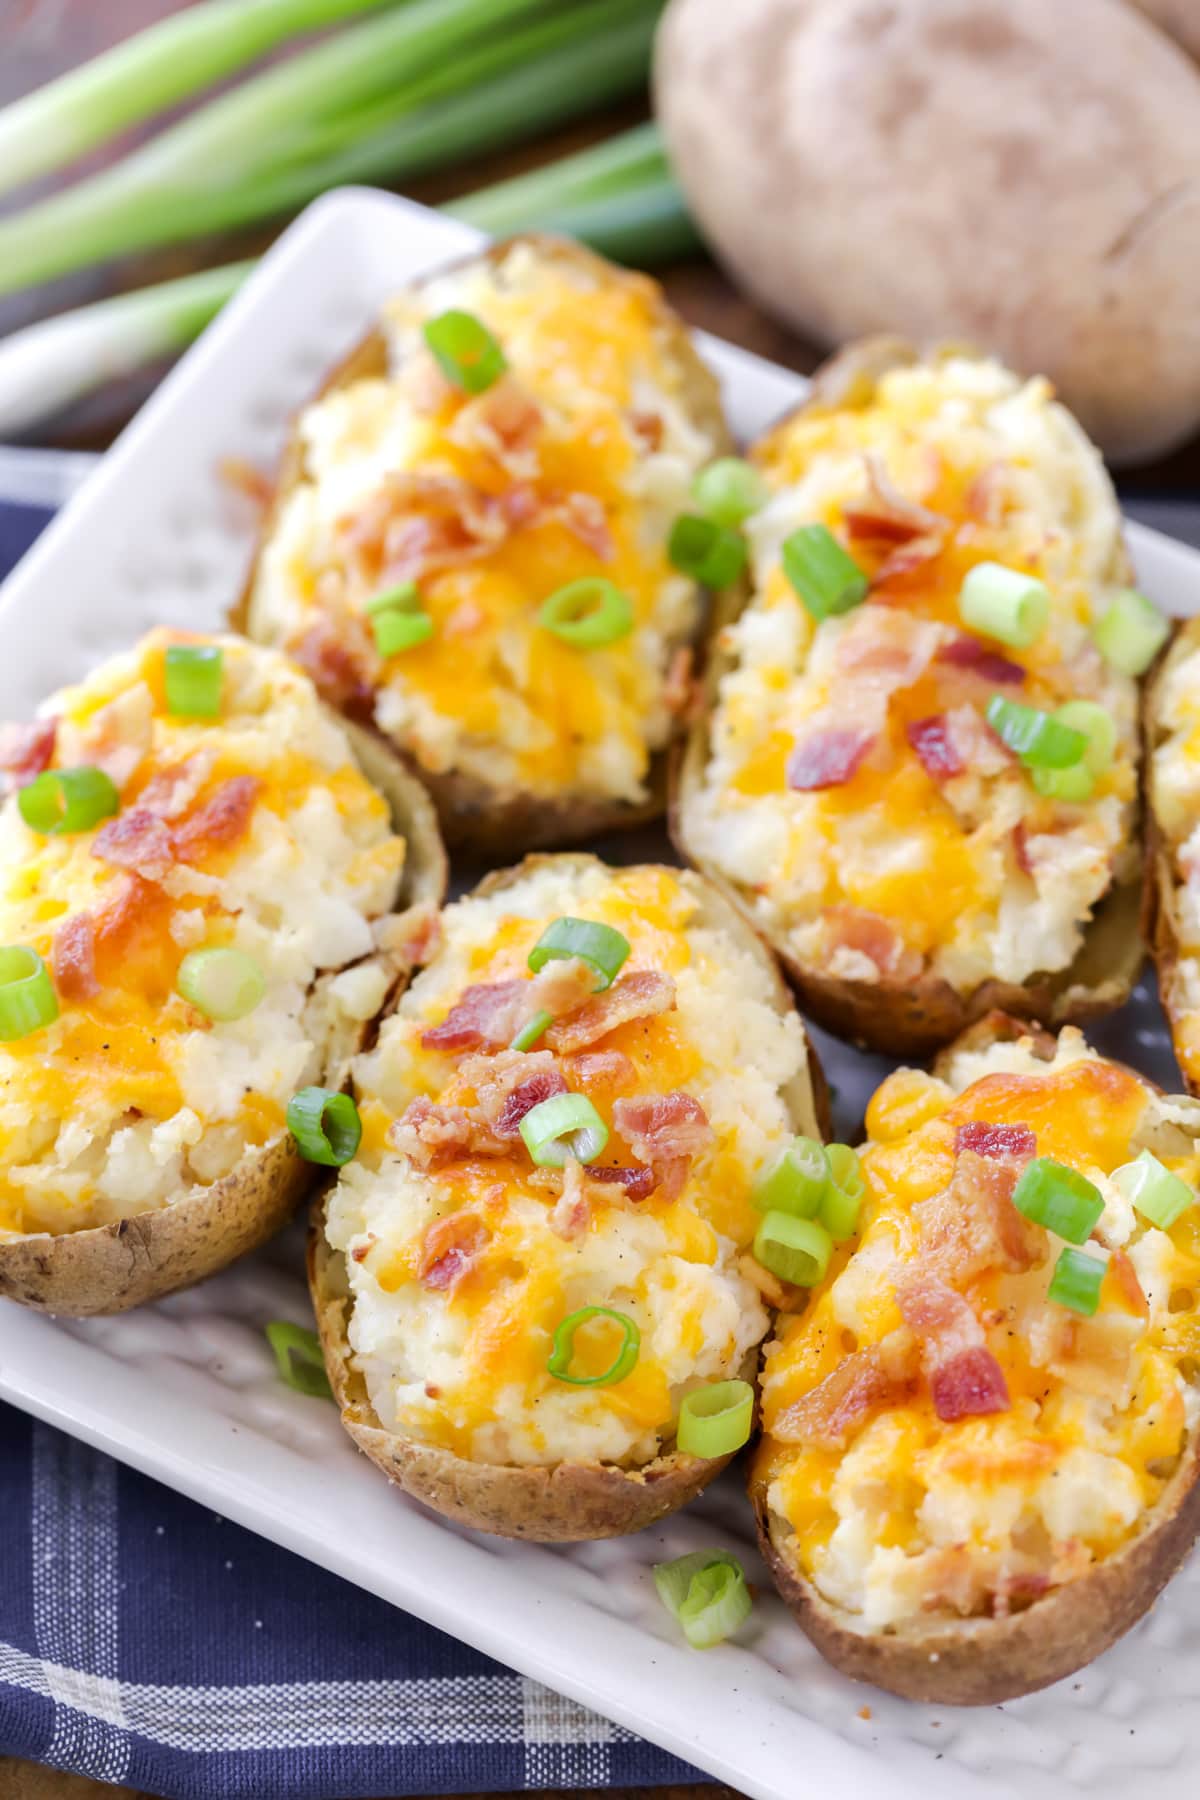 Several twice baked potato halves topped with bacon, cheese, and green onions.